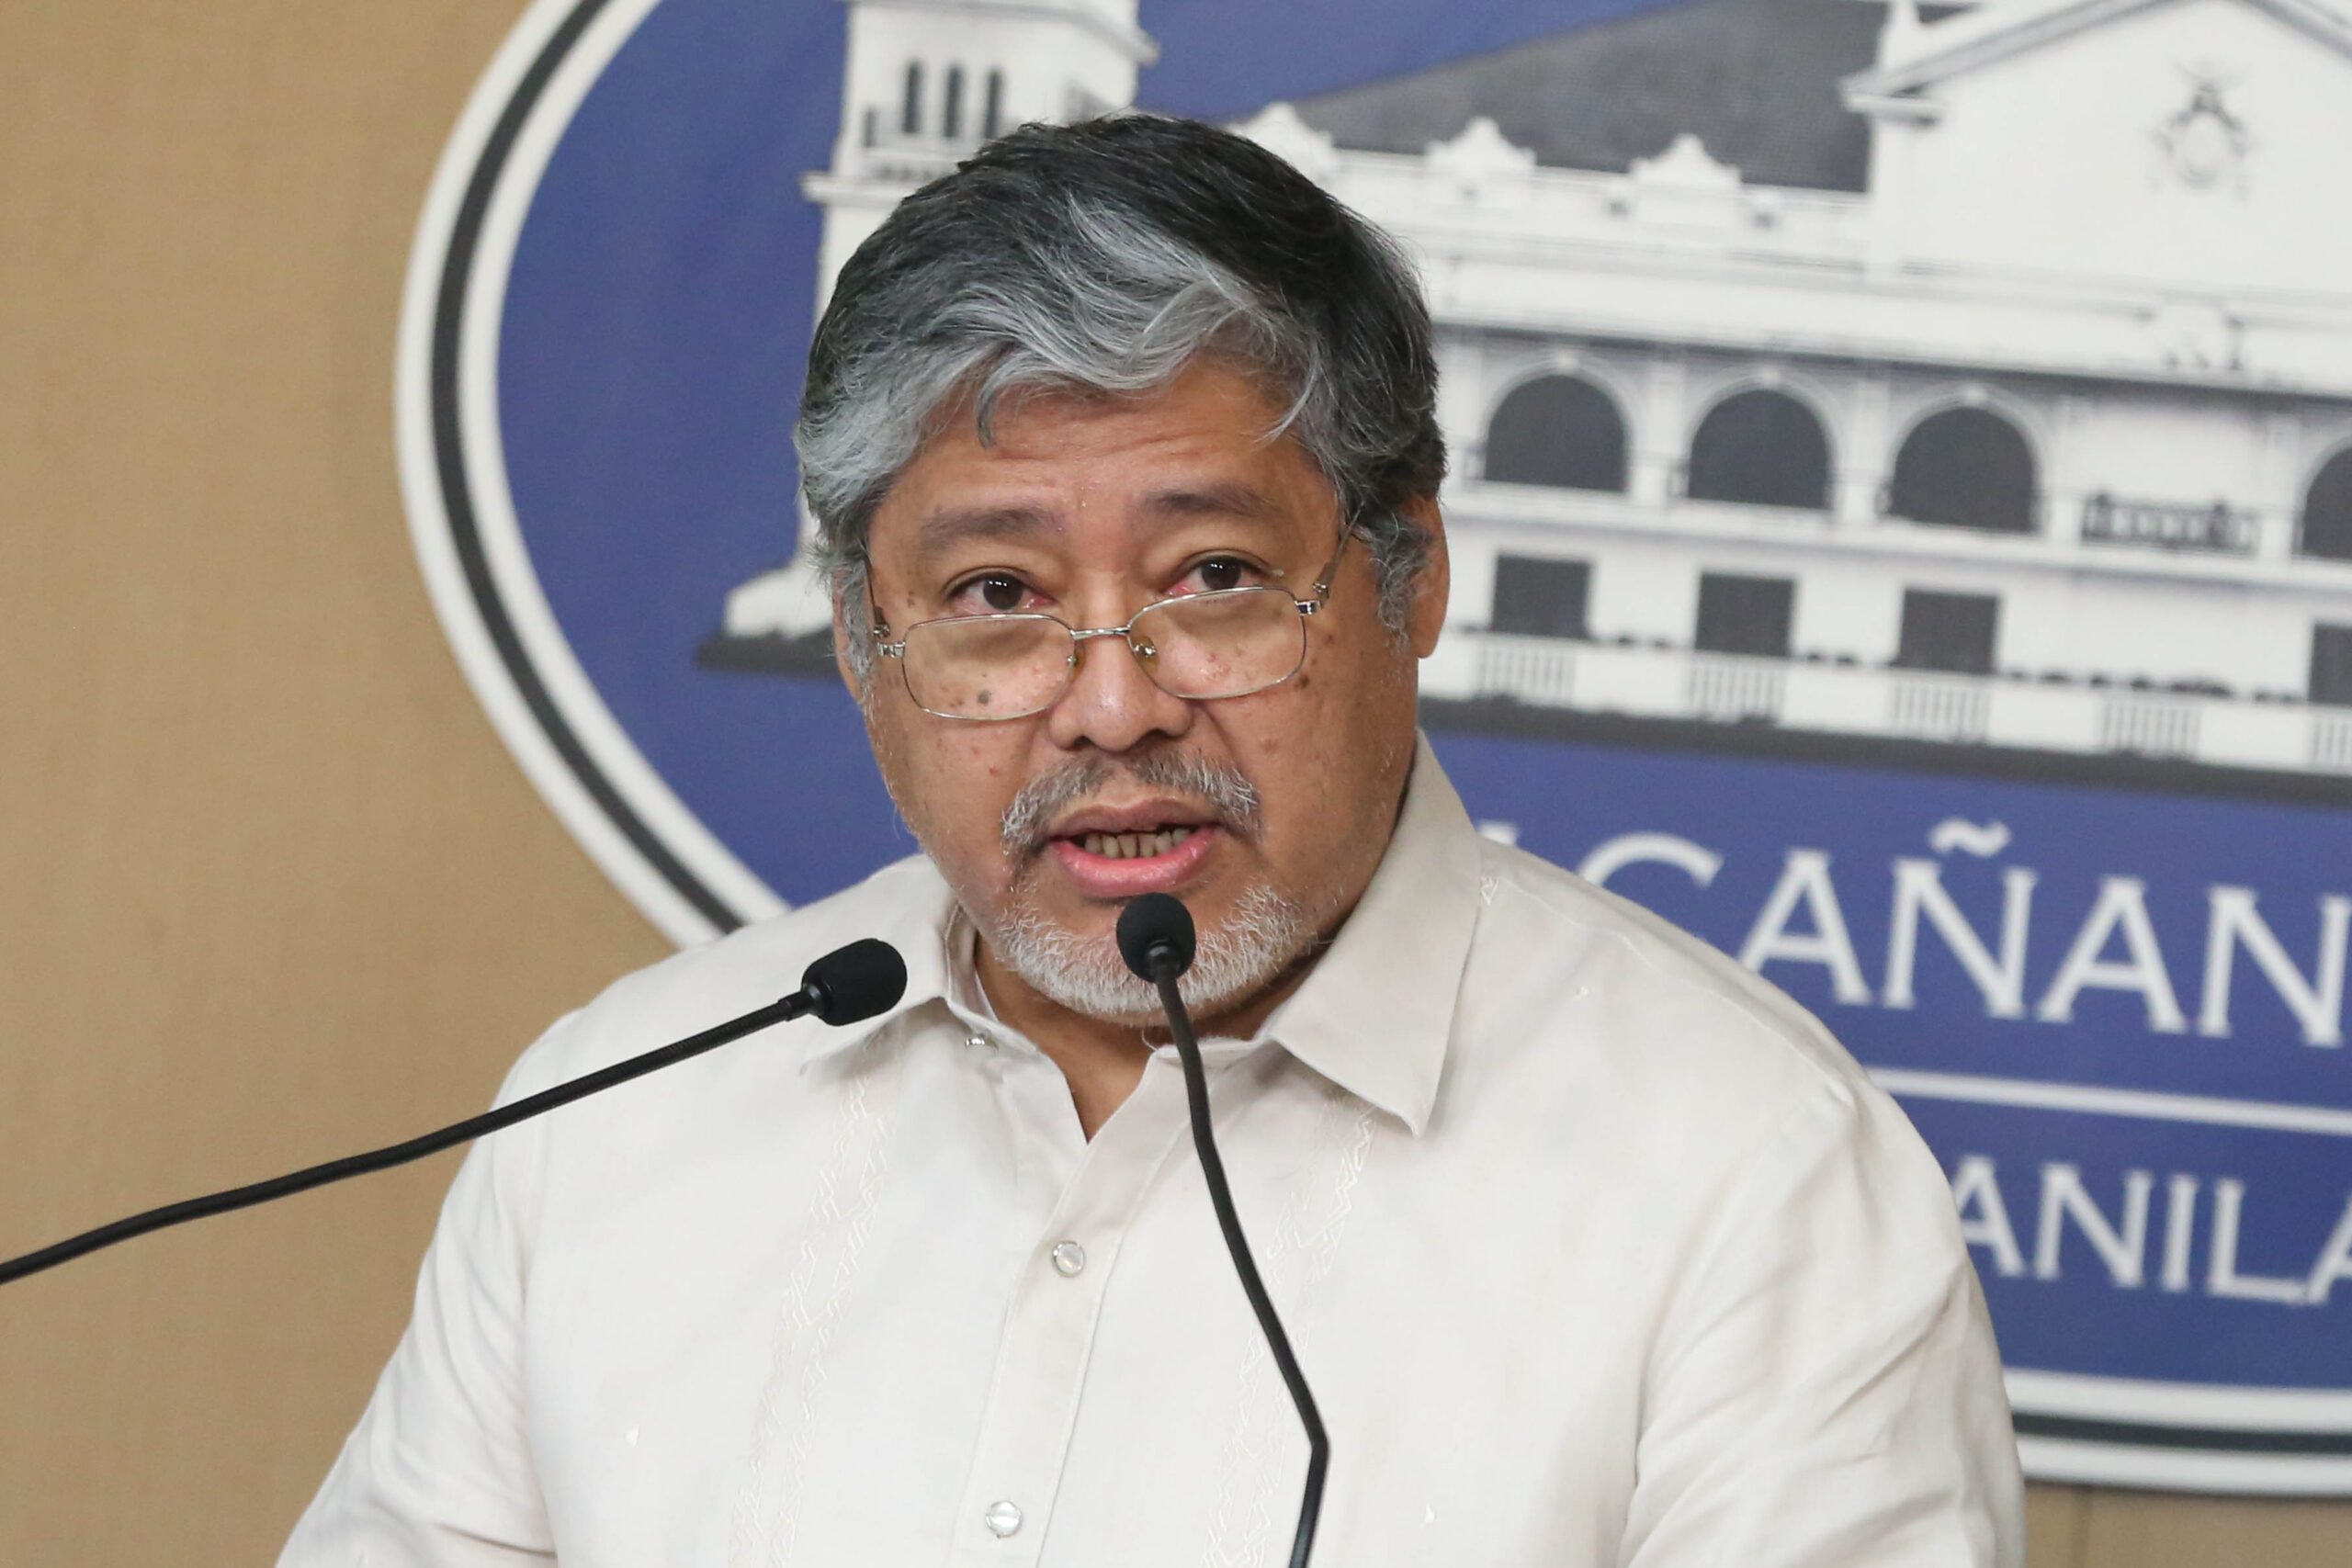 Enrique Manalo is acting foreign secretary